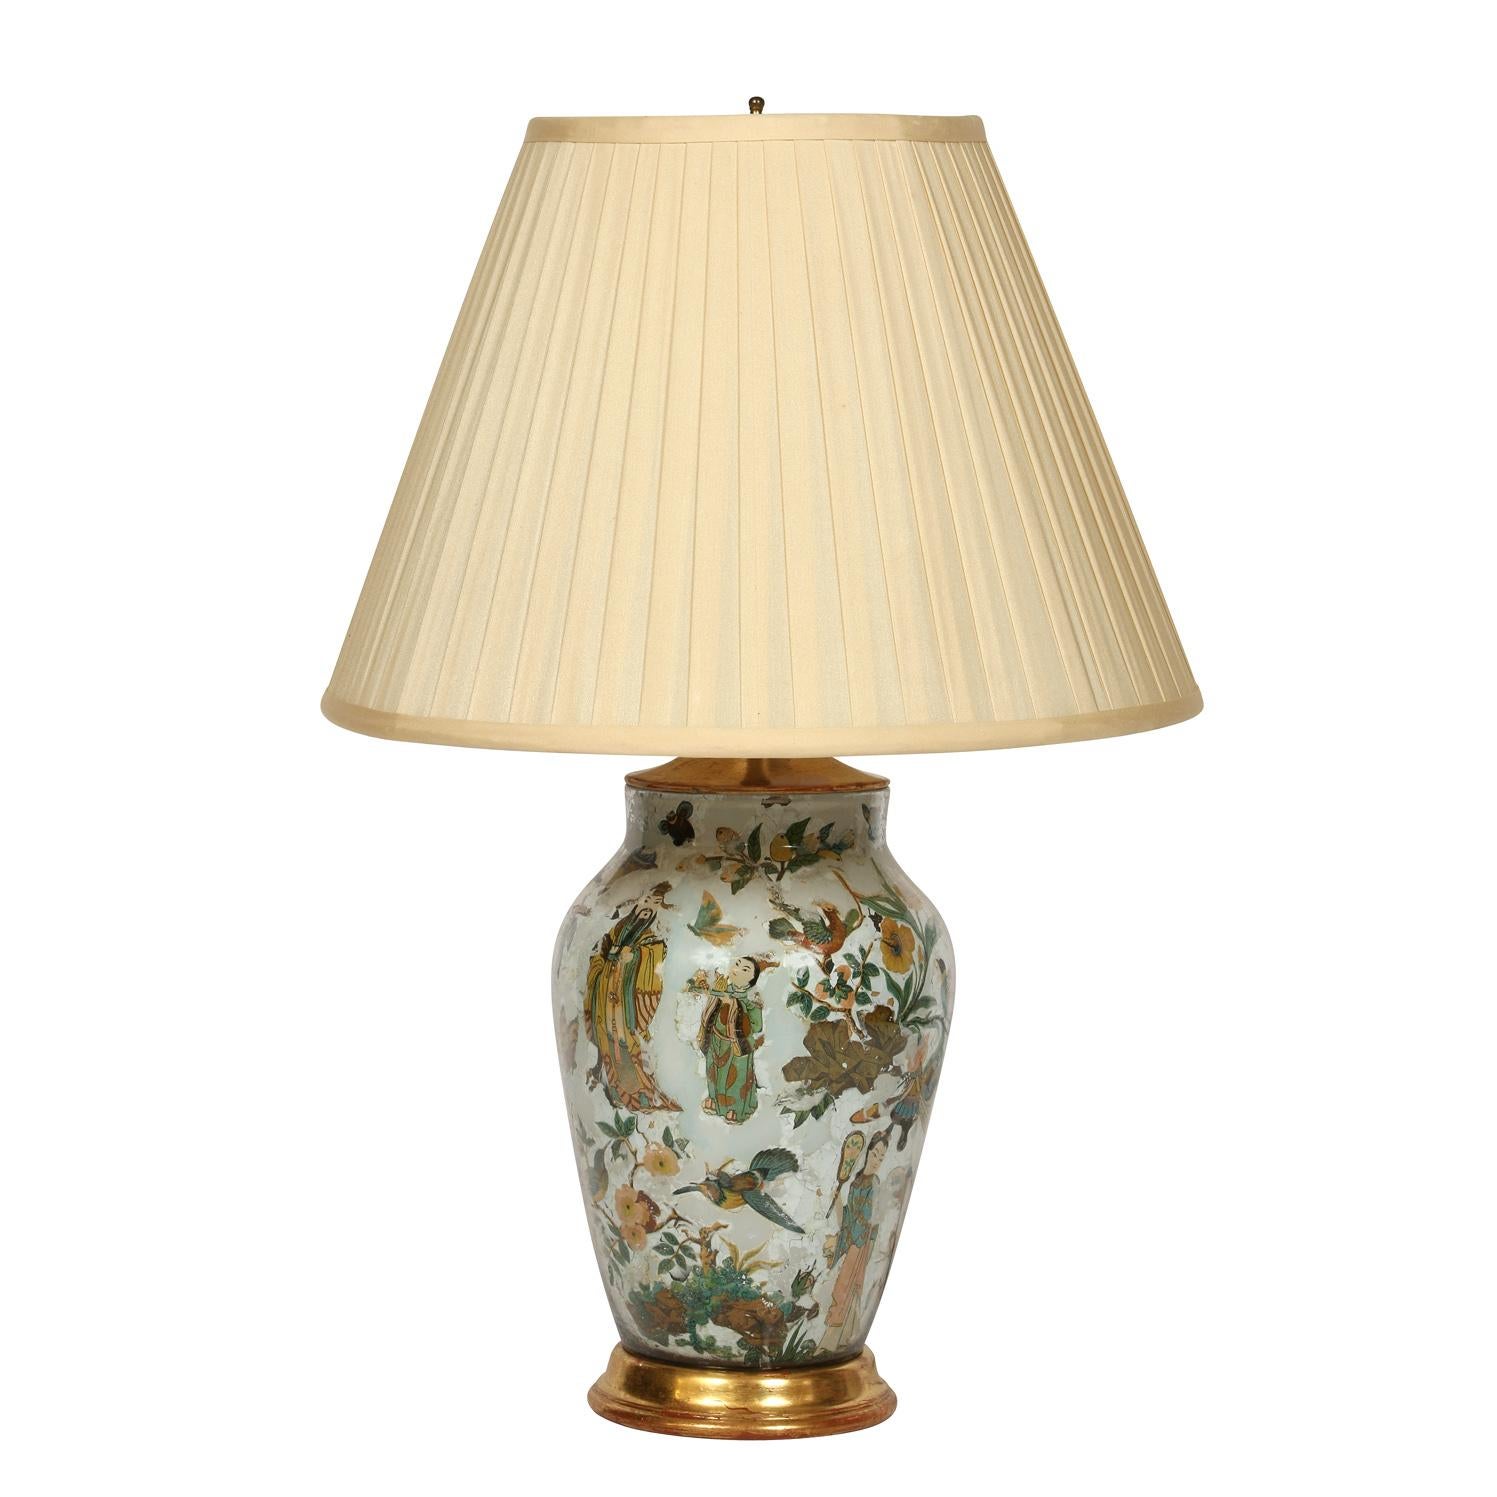 Reverse glass painted chinoiserie vintage lamp with gilt base and silk shade.